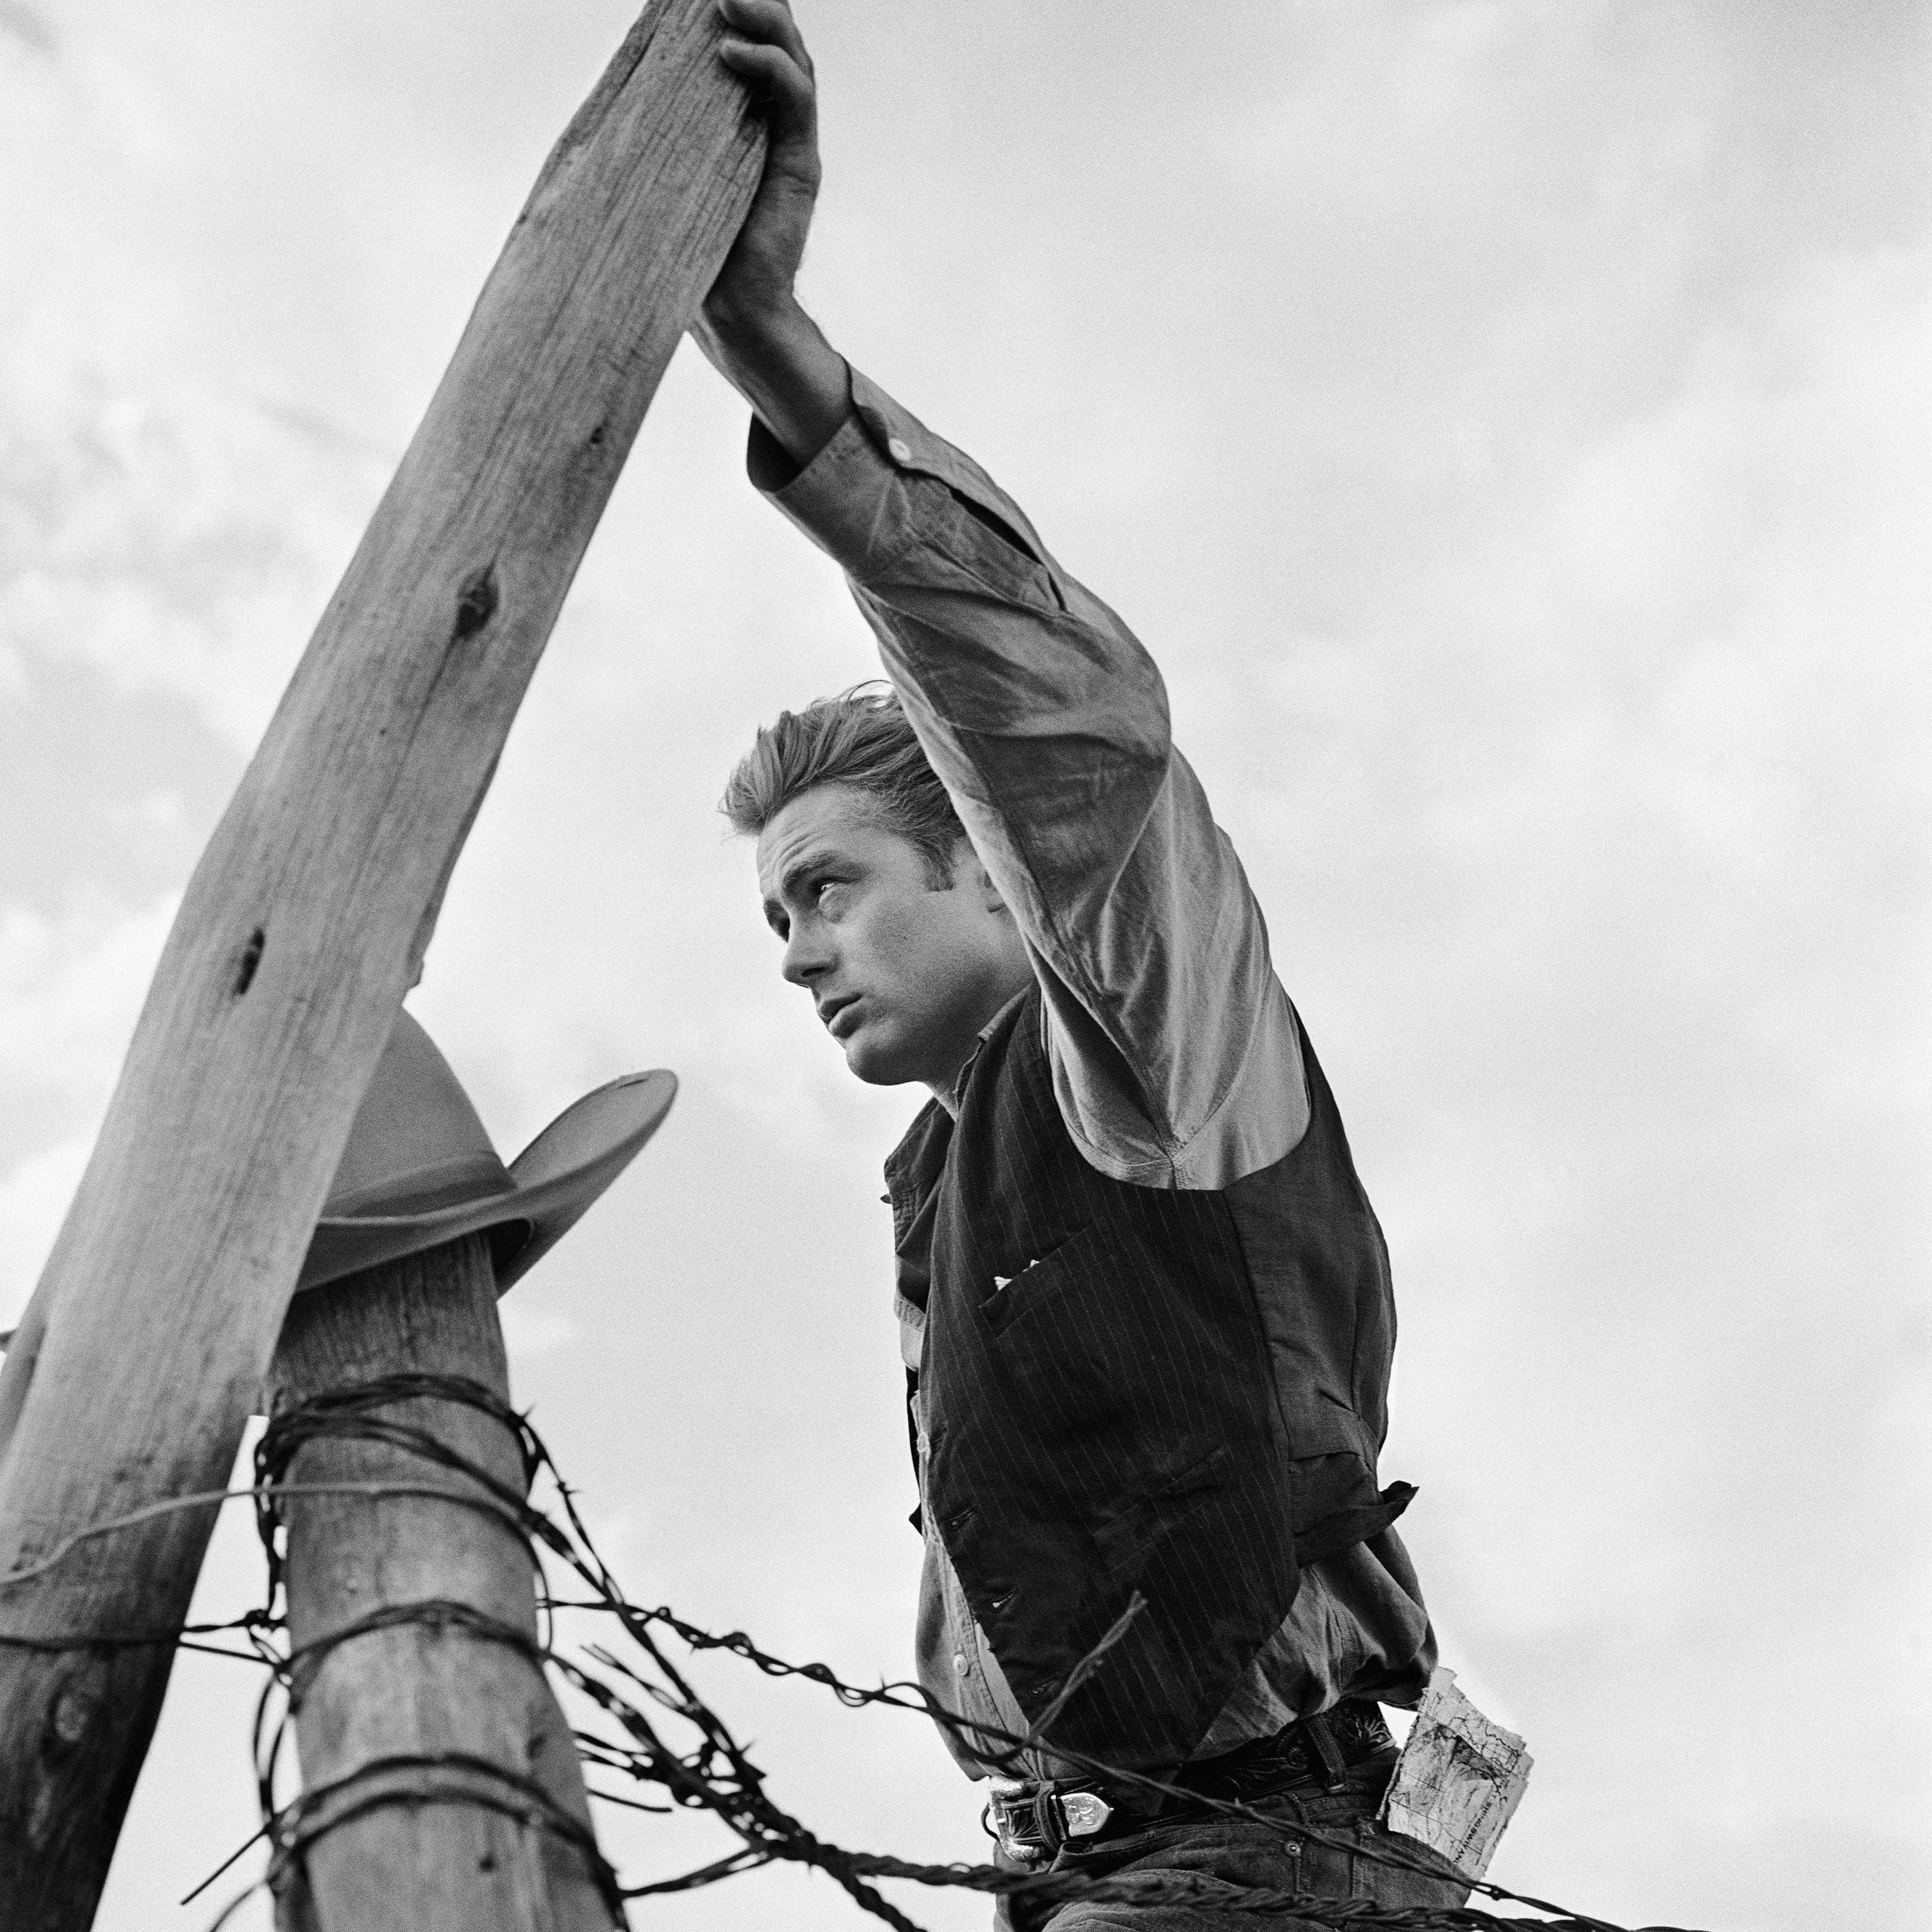 Frank Worth Black and White Photograph - James Dean as Jett Rink in "Giant"